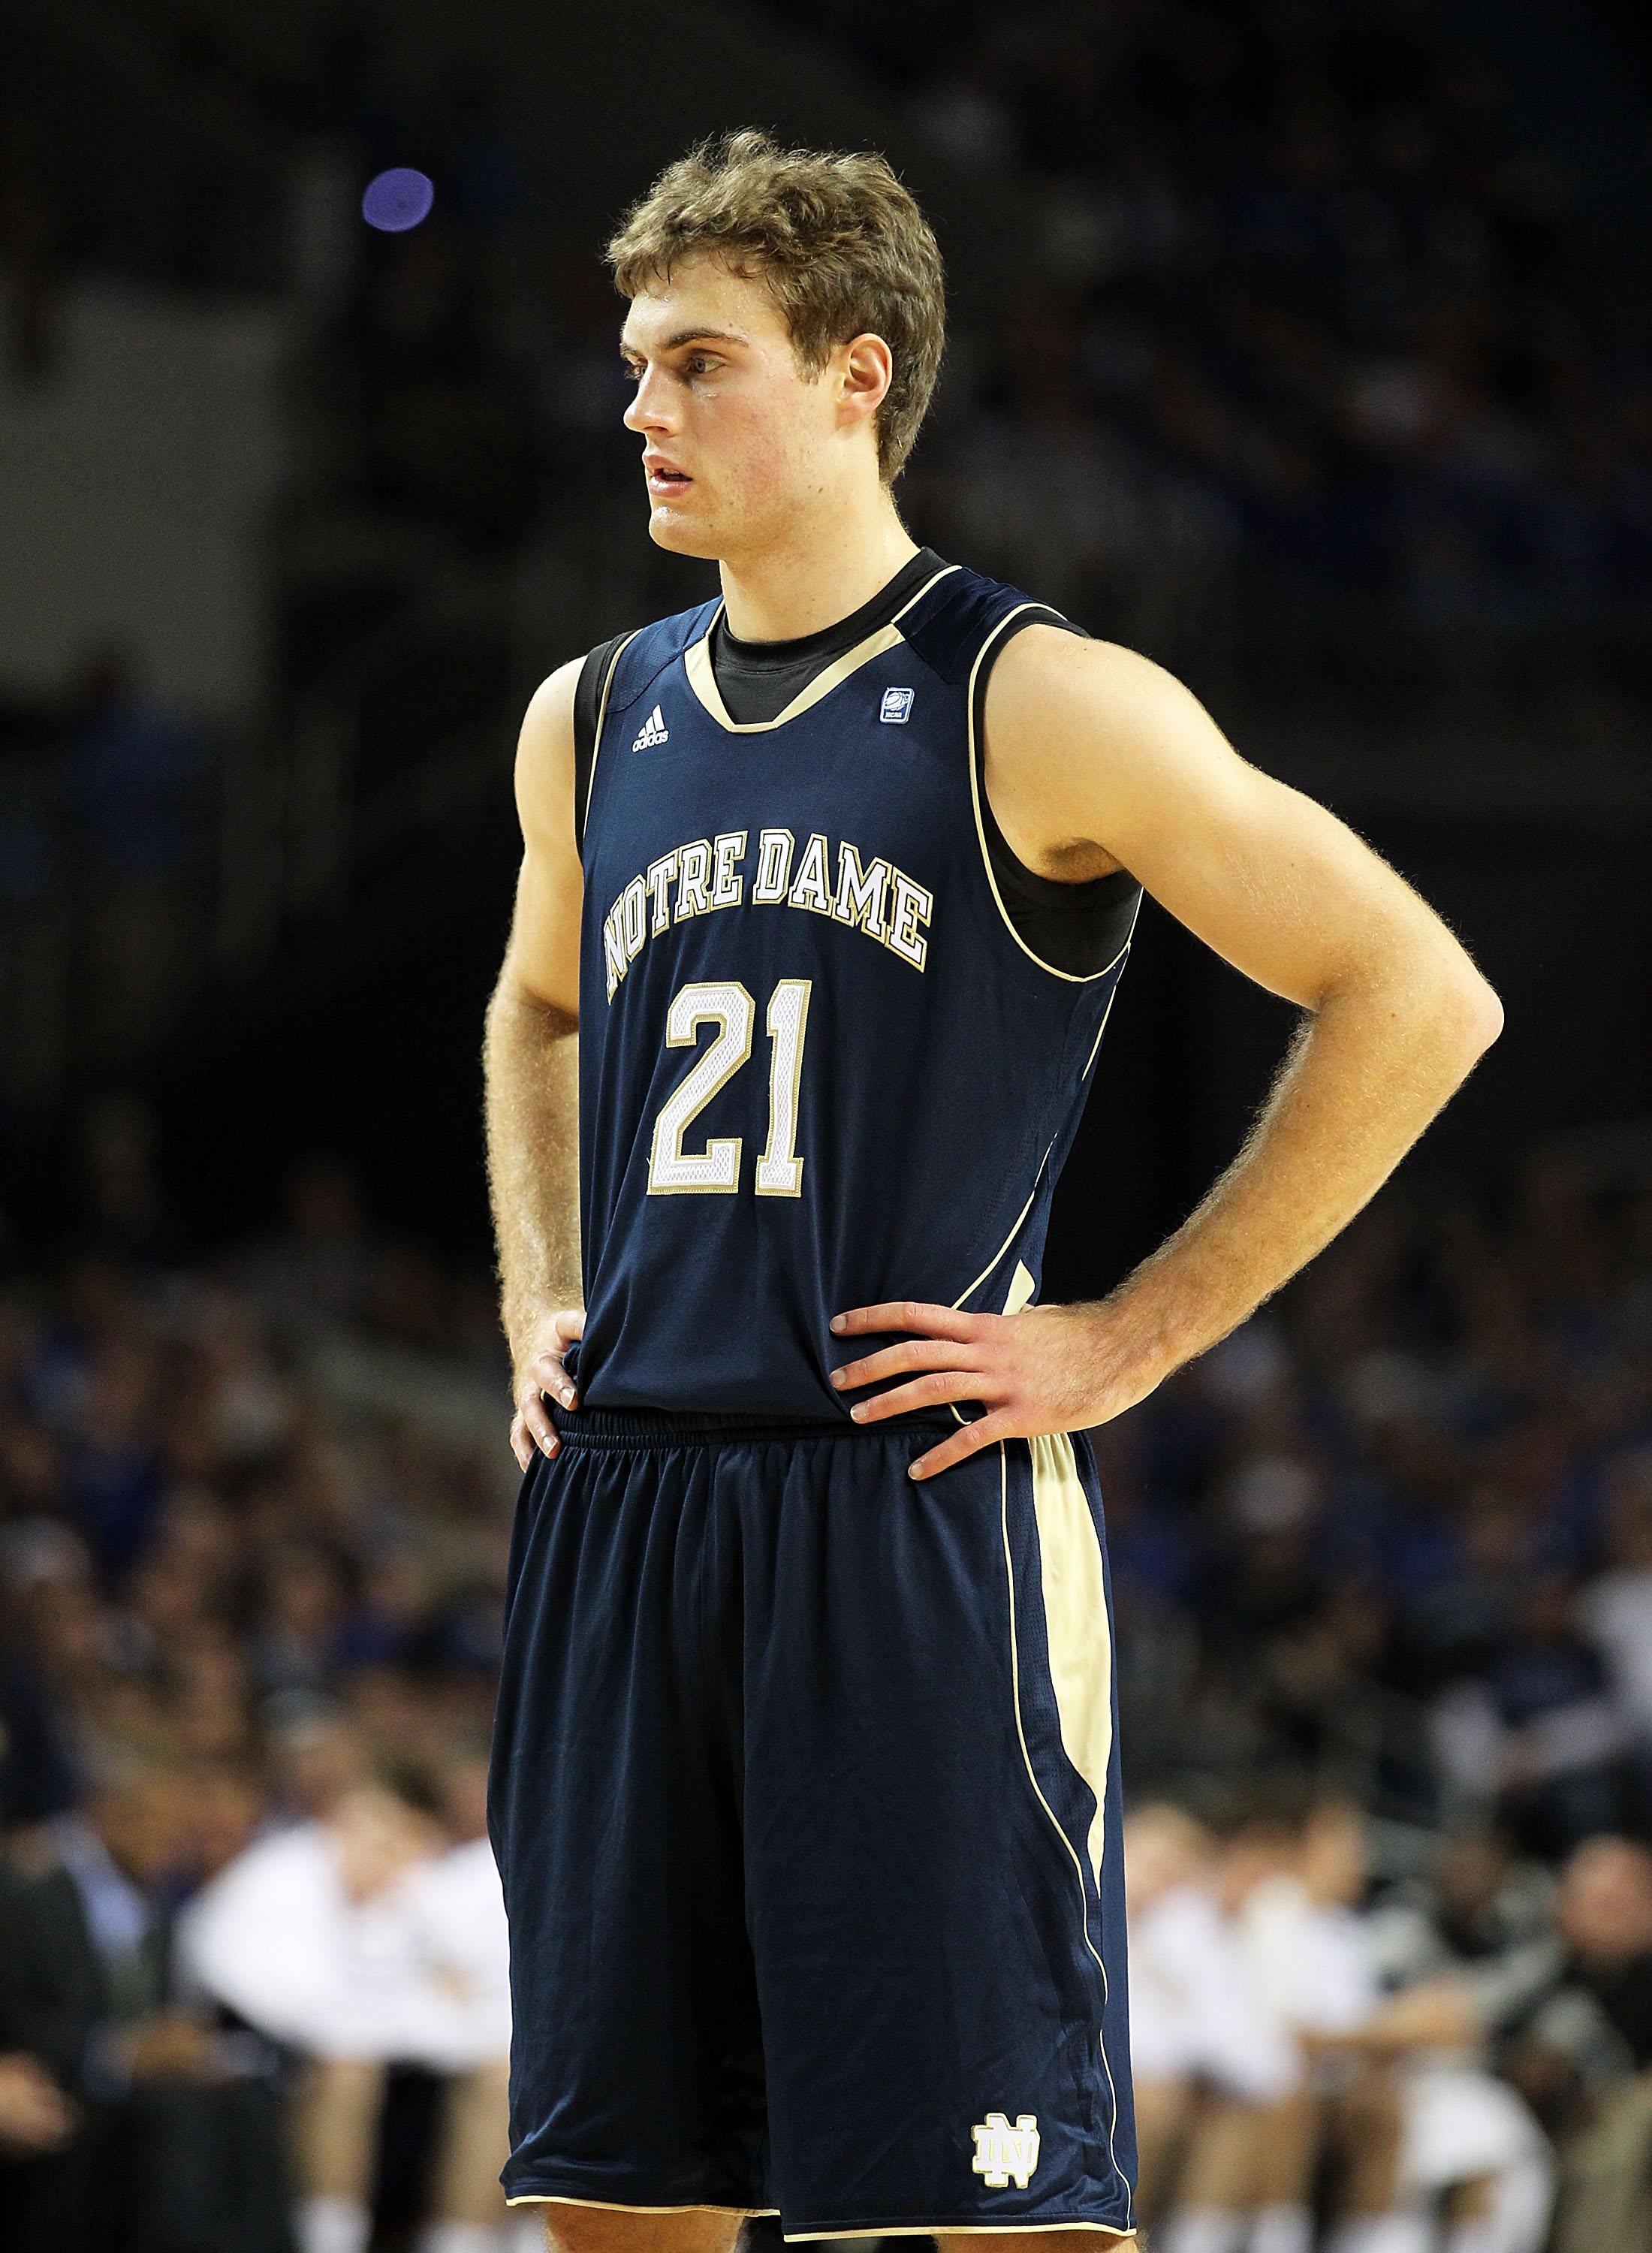 LOUISVILLE, KY - DECEMBER 08:  Tim Abromaitis #21 of the Notre Dame Fighting Irish is pictured during the game against the Kentucky Wildcats in the 2010 DIRECTV SEC/BIG EAST Invitational at Freedom Hall on December 8, 2010 in Louisville, Kentucky.  (Photo